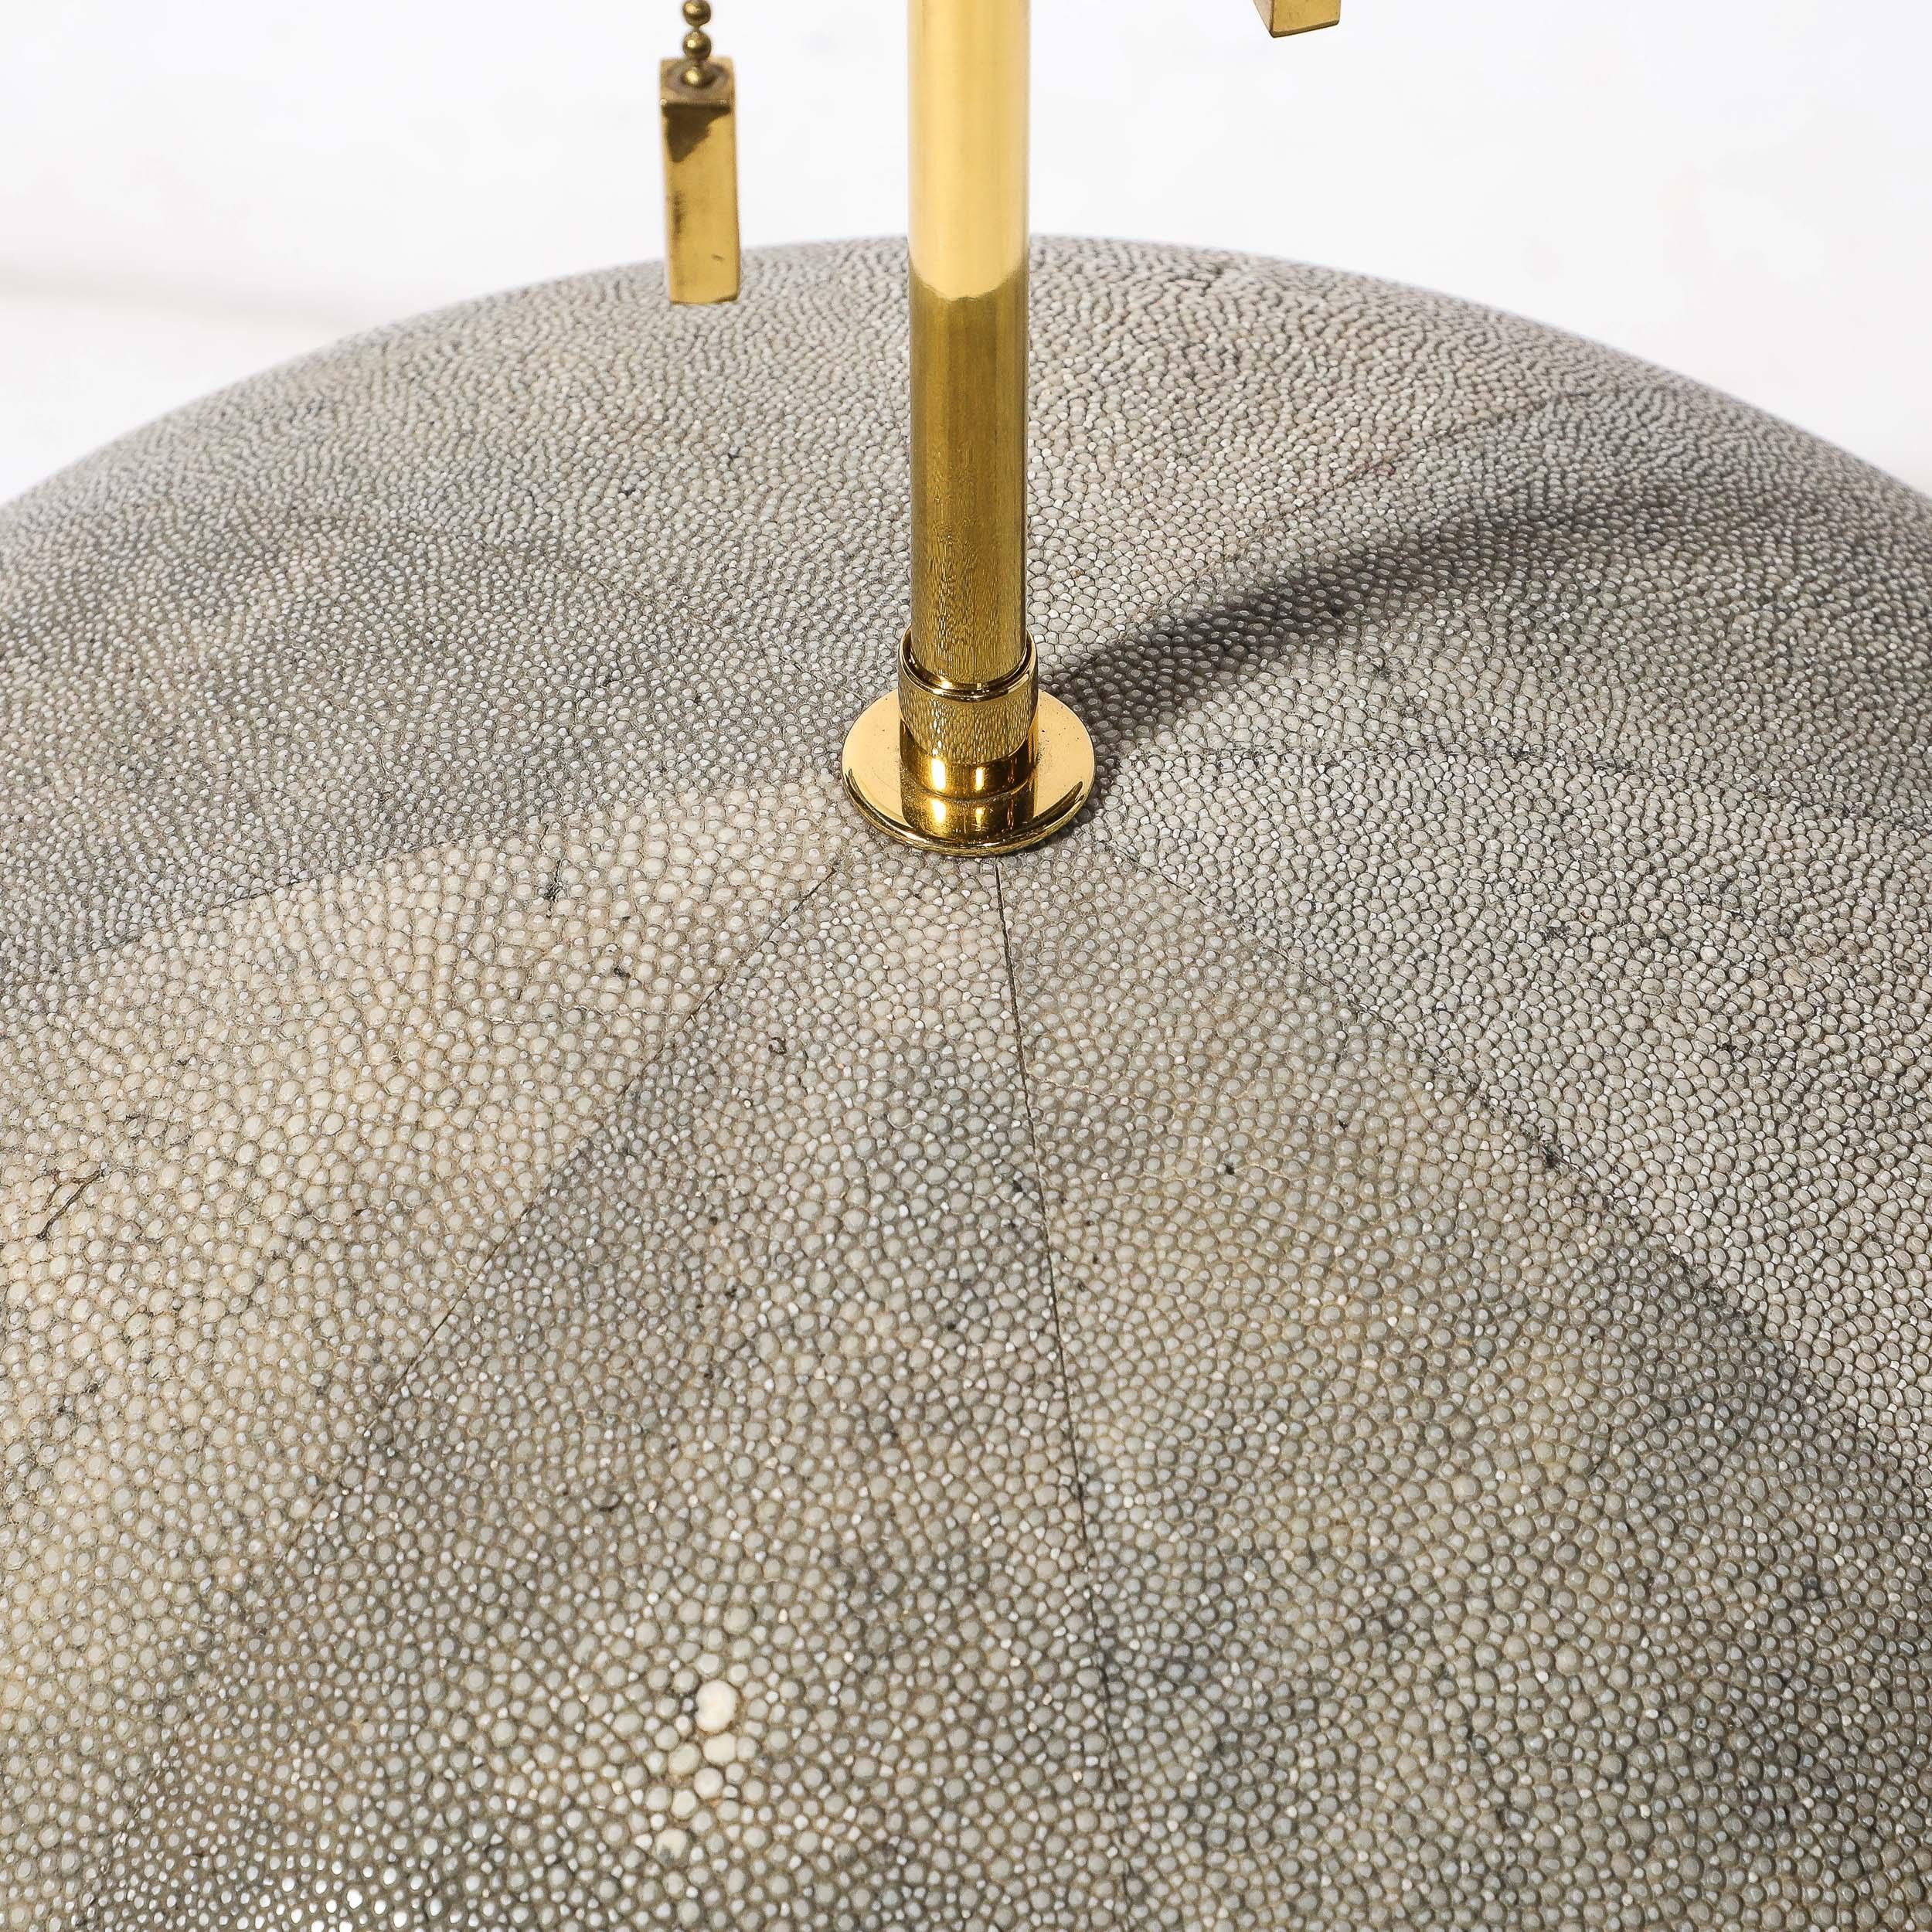 Mid-Century Modernist Tessellated Shagreen Geometric Table Lamp by Karl Springer For Sale 1